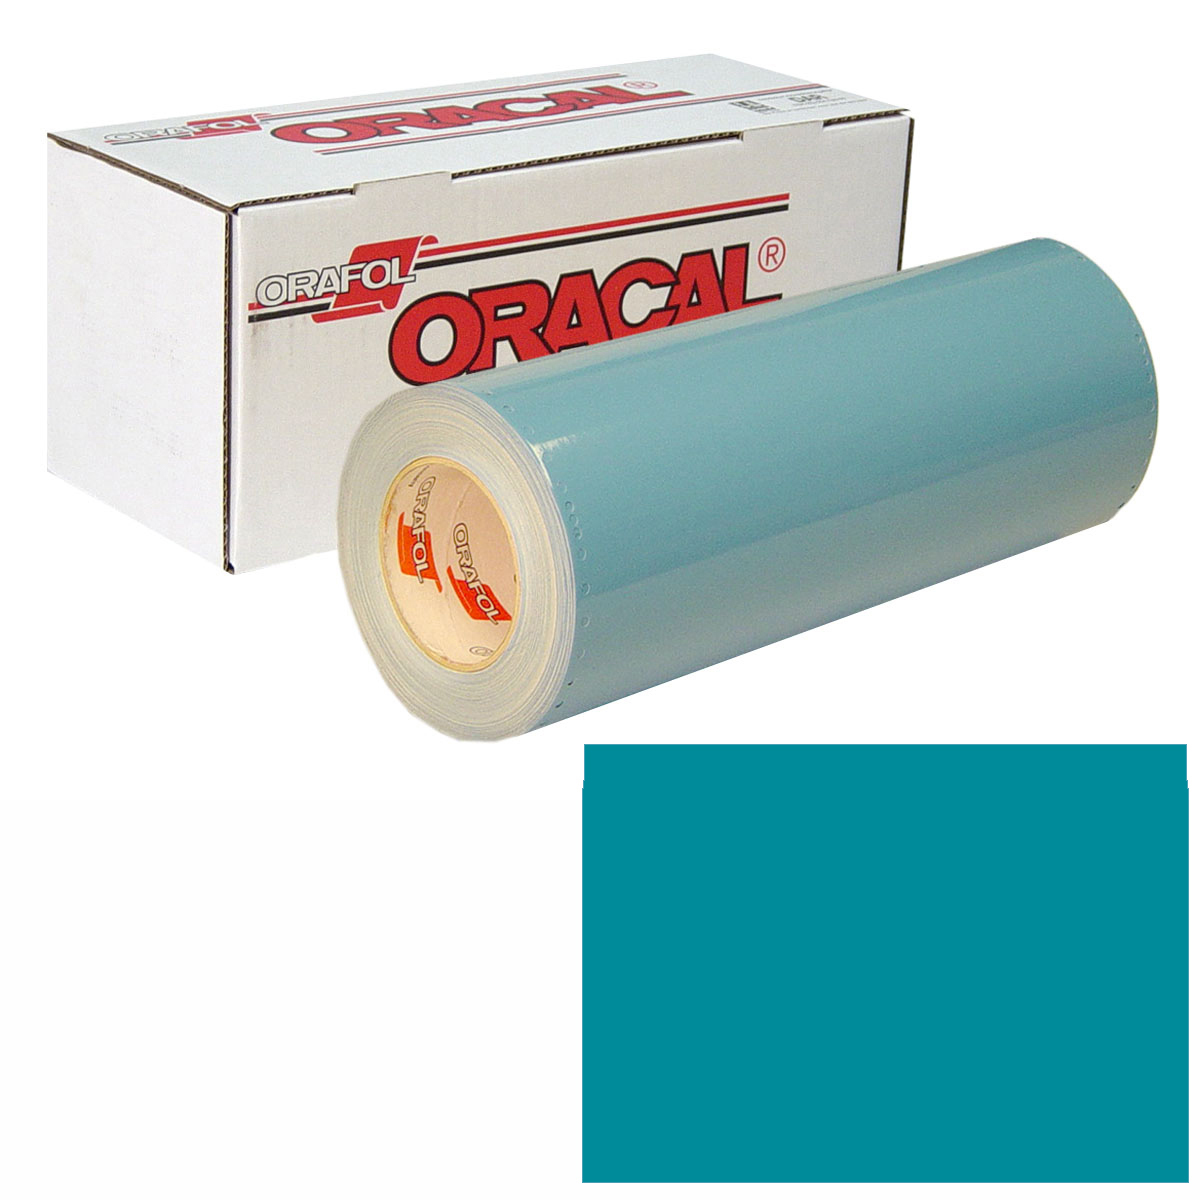 ORACAL 751 30in X 50yd 066 Turquoise Blue